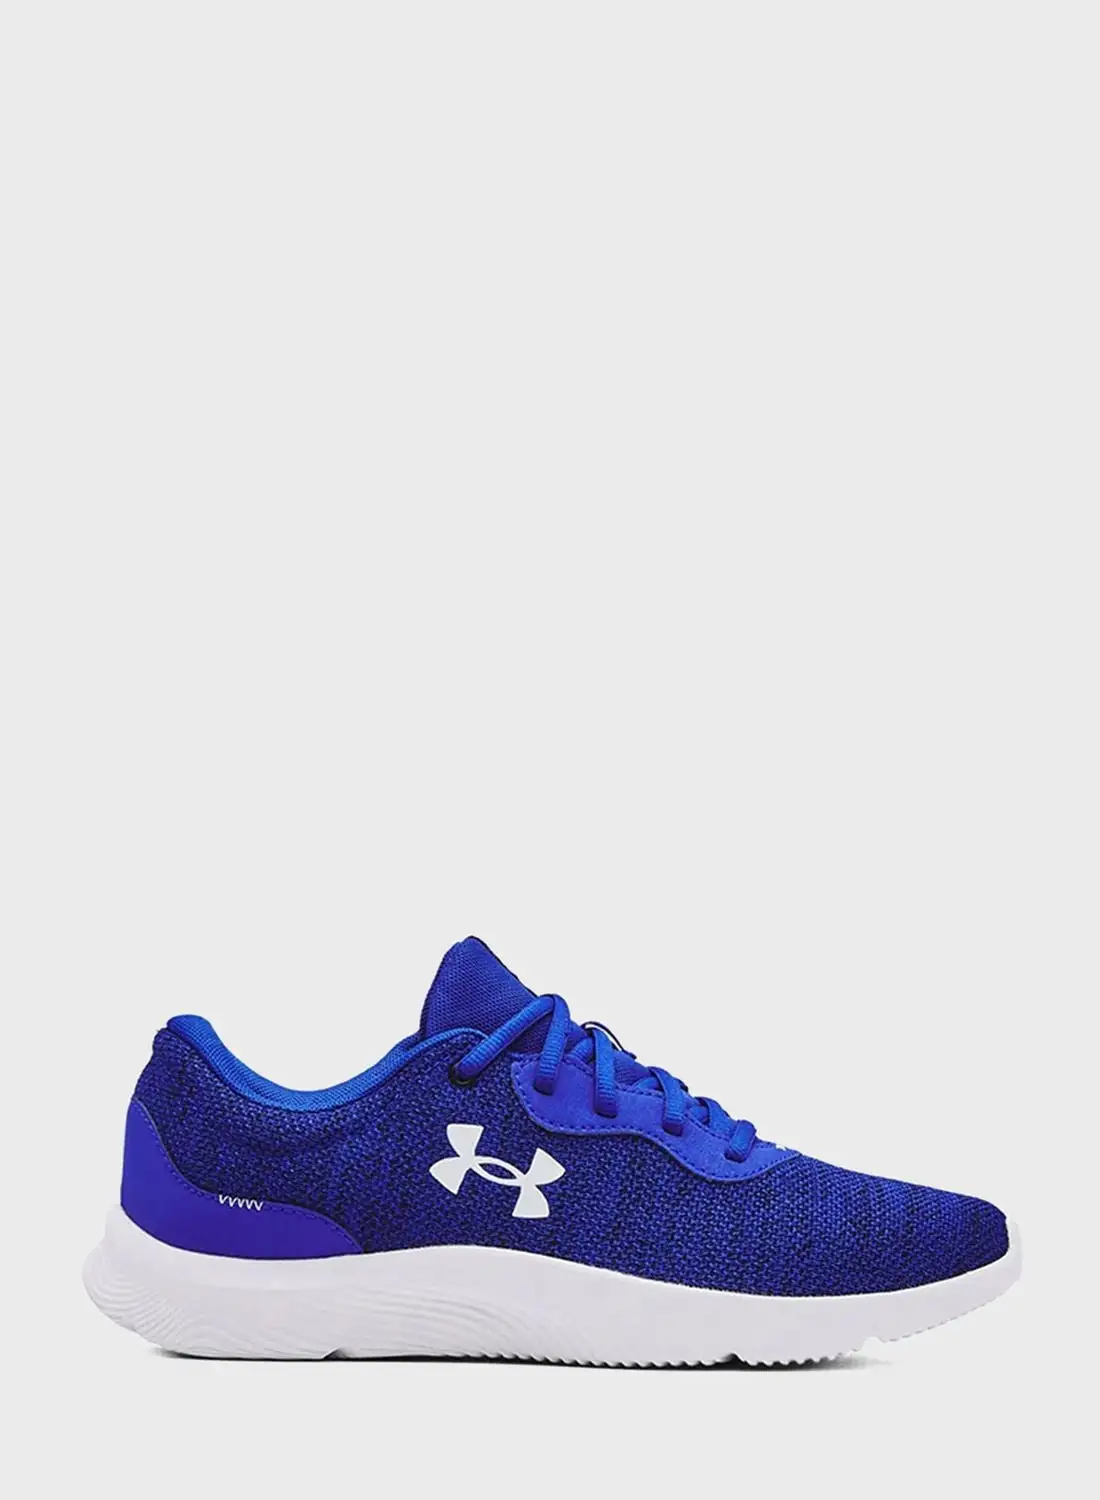 UNDER ARMOUR Mojo 2 Training Shoes